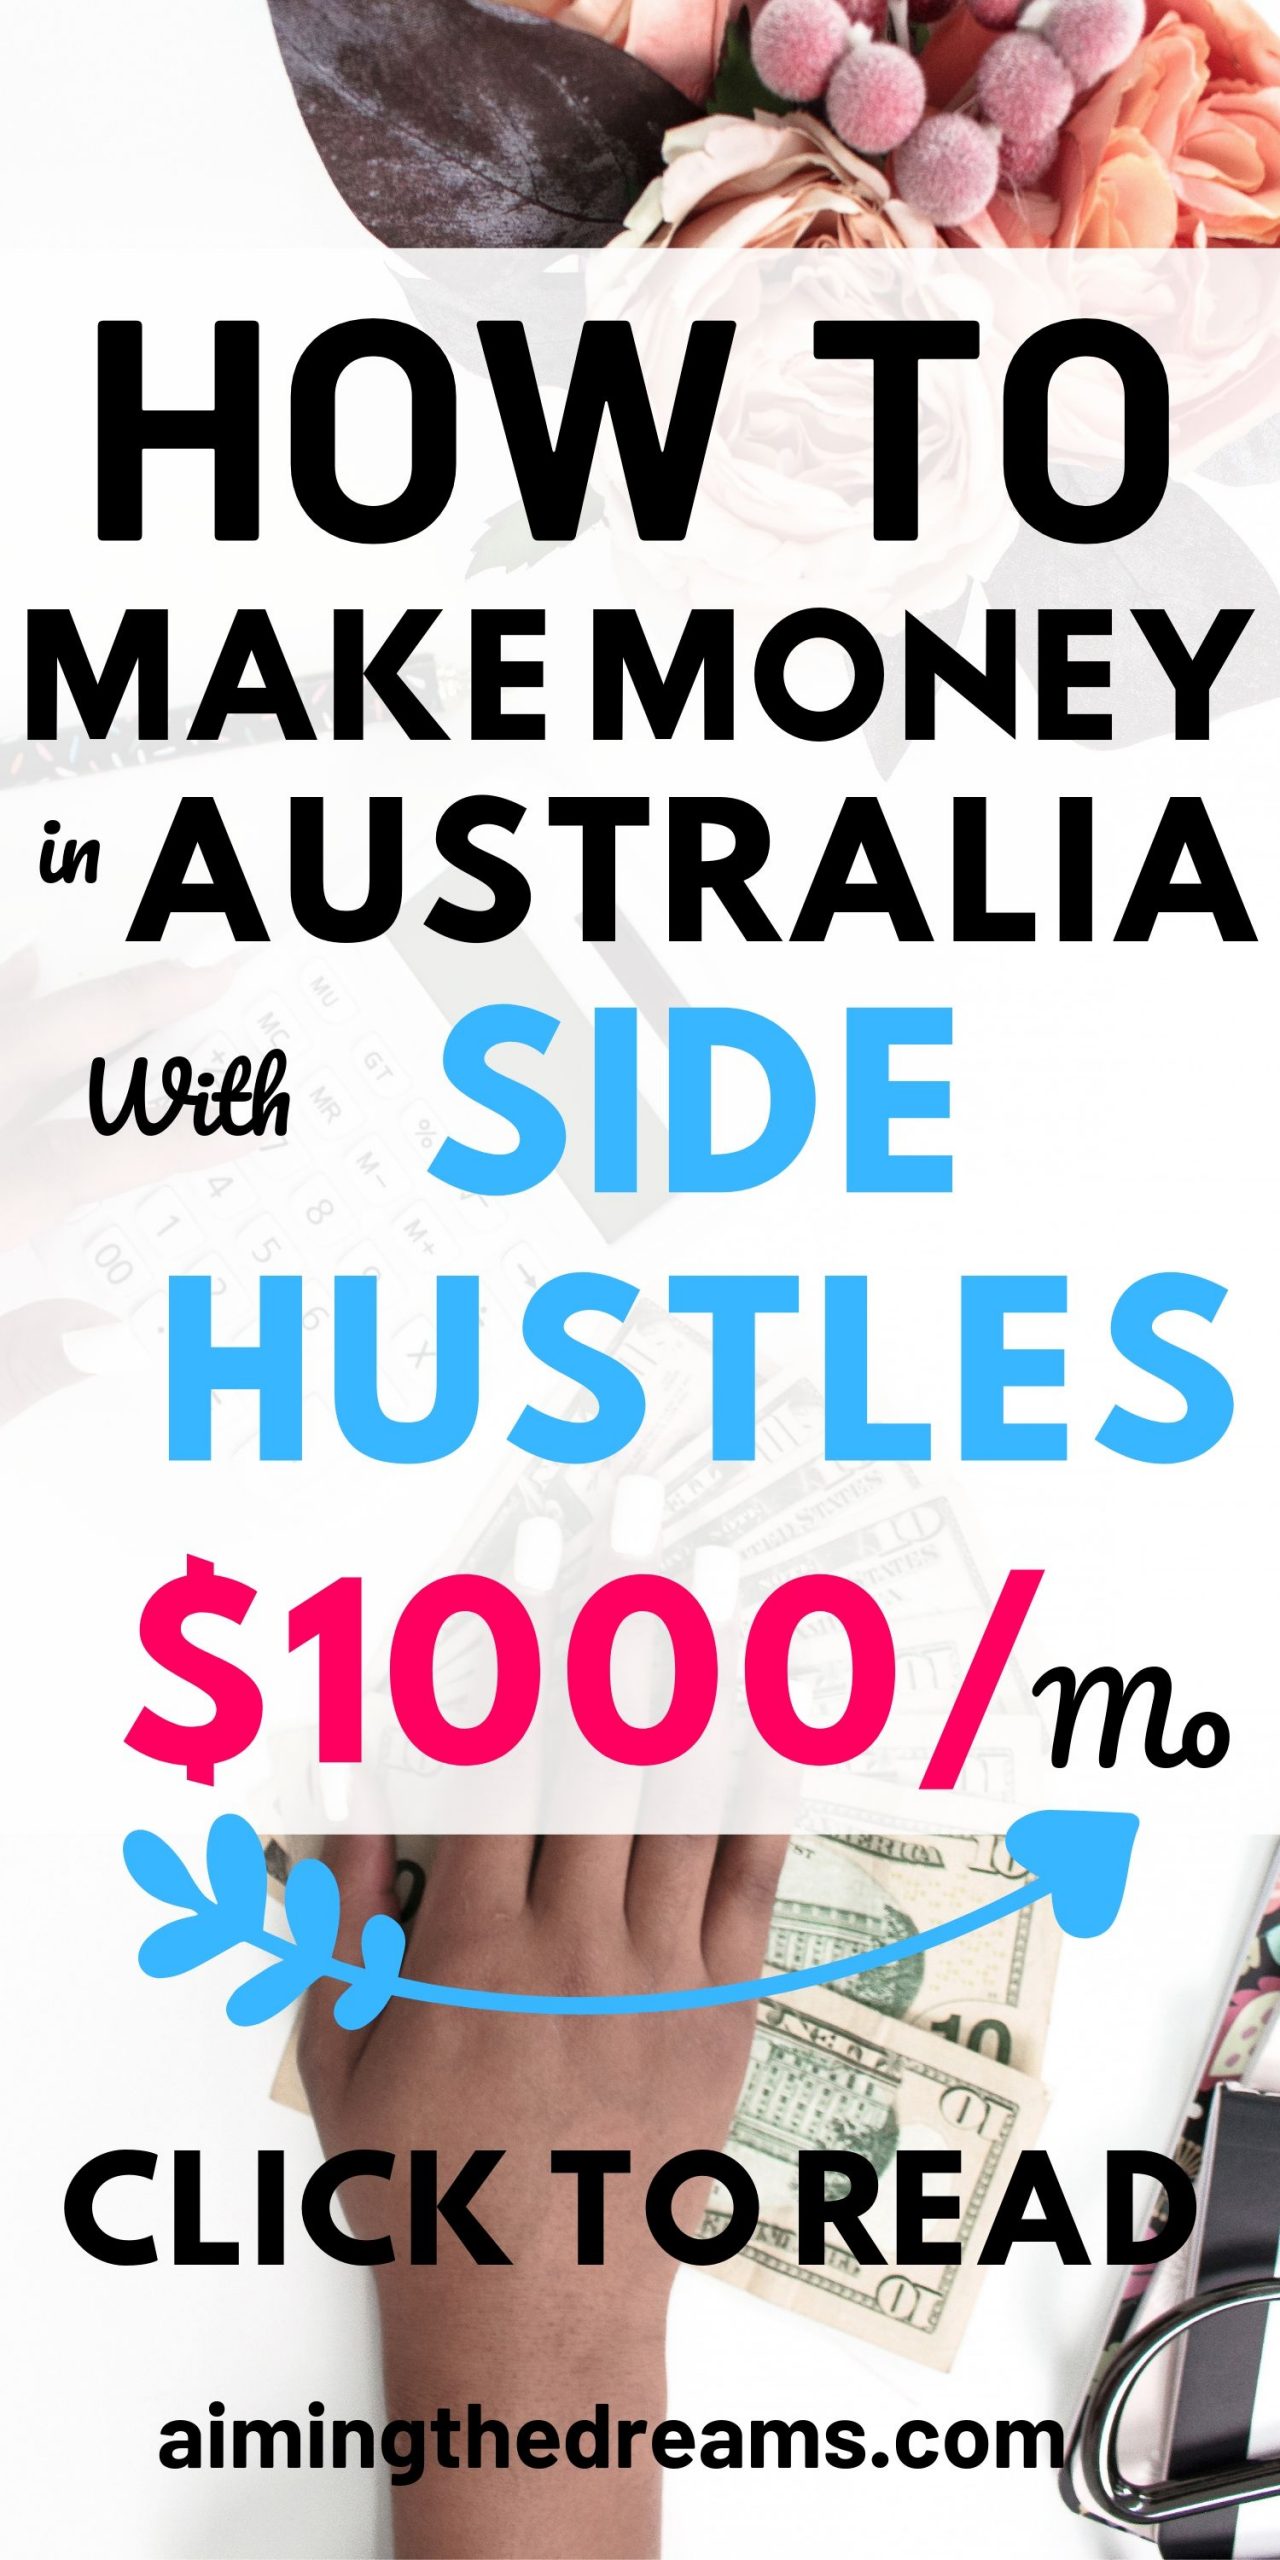 Make money with side hustles. These will let you make money online and work from home.